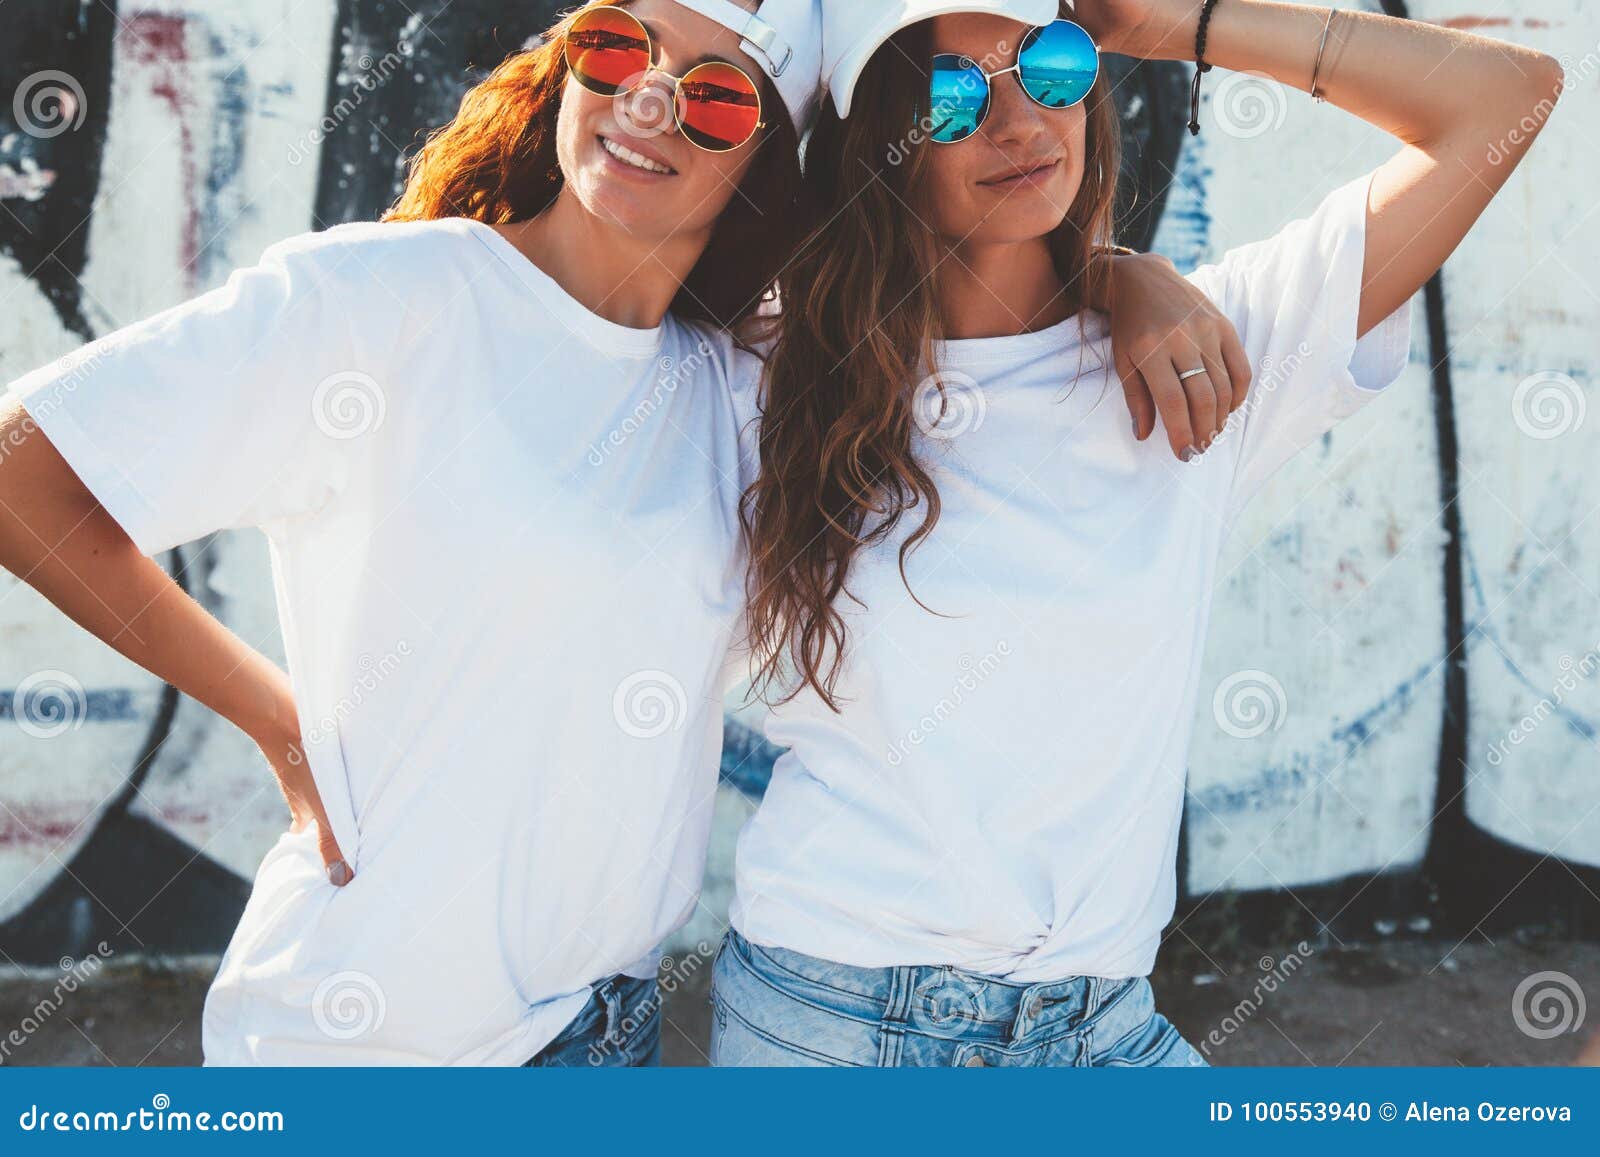 Download Models Wearing Plain Tshirt And Sunglasses Posing Over ...